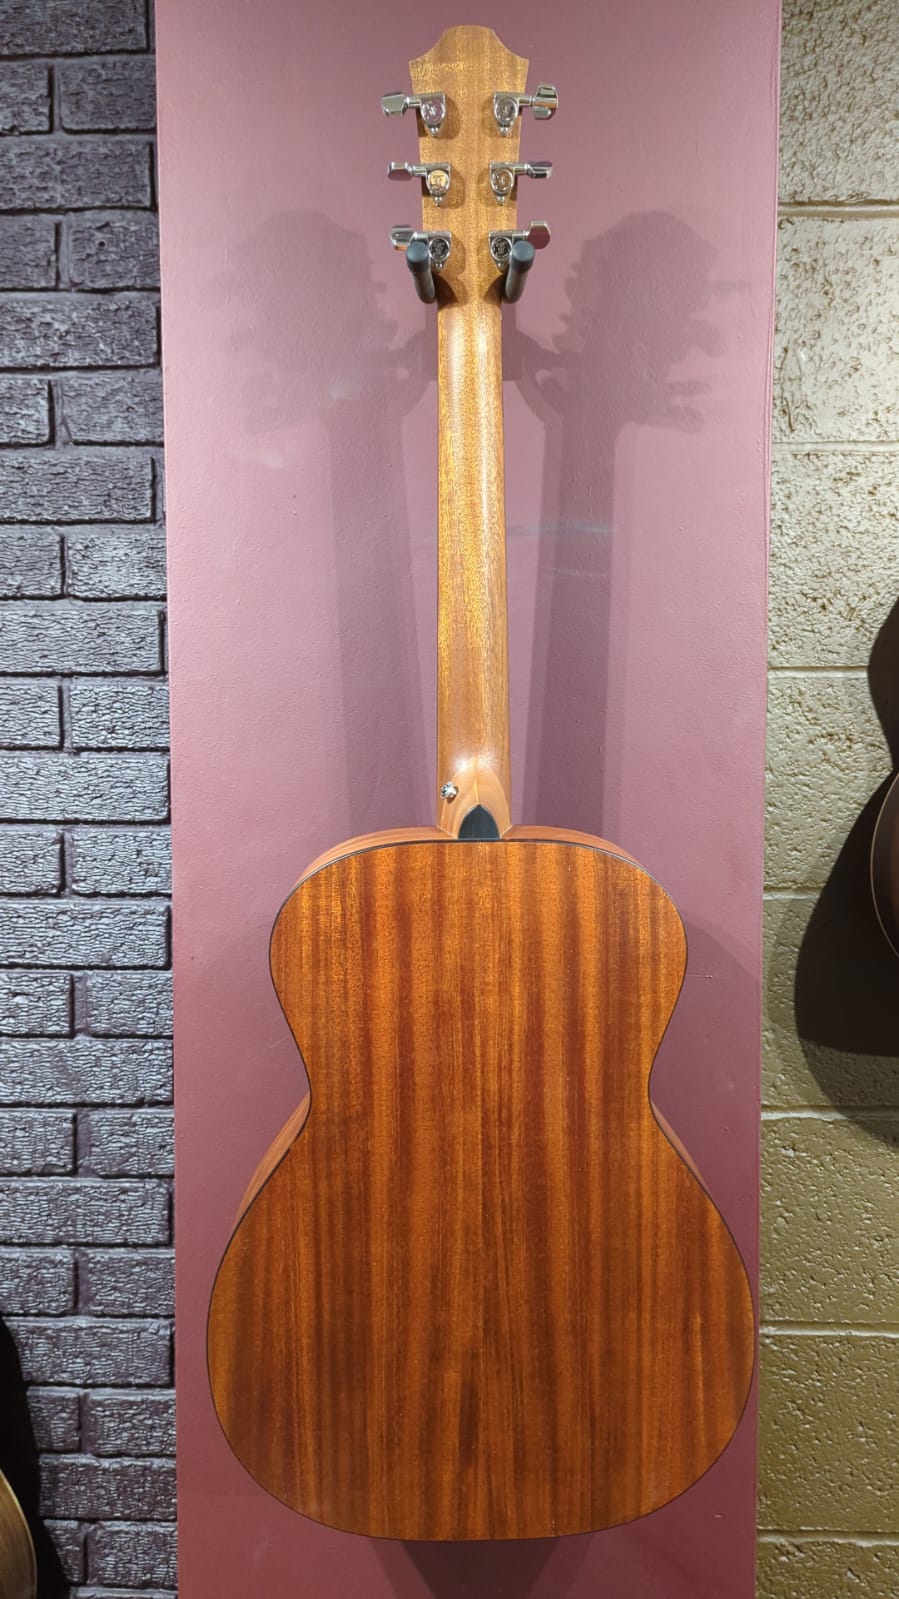 Furch OM 20 CM (Used), Acoustic Guitar for sale at Richards Guitars.